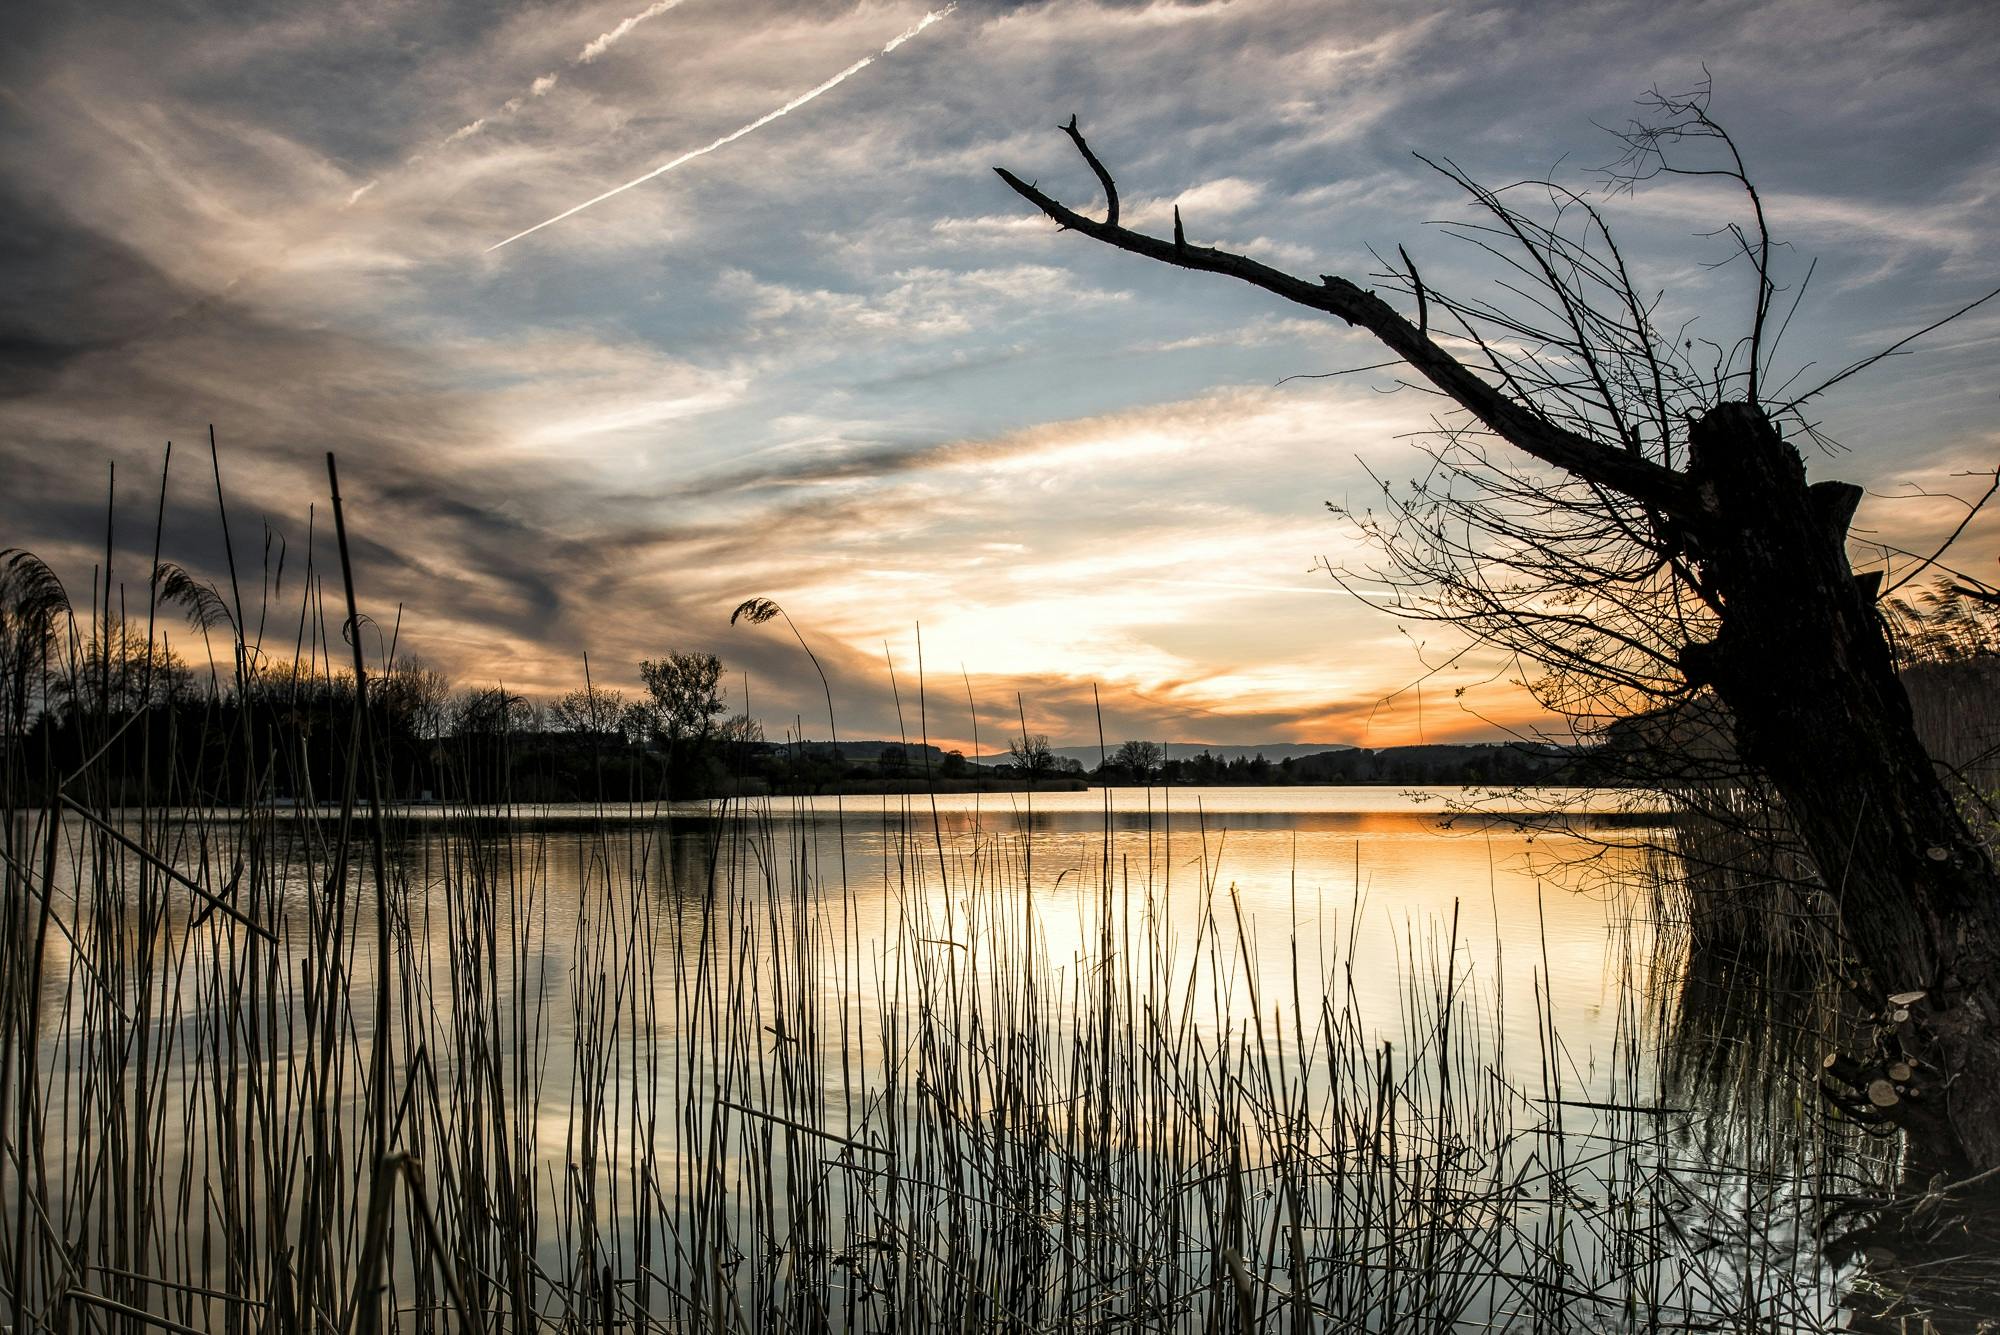 a tree that is standing in the water, by Jan Tengnagel, pexels contest winner, land art, small reeds behind lake, sunset sky, thumbnail